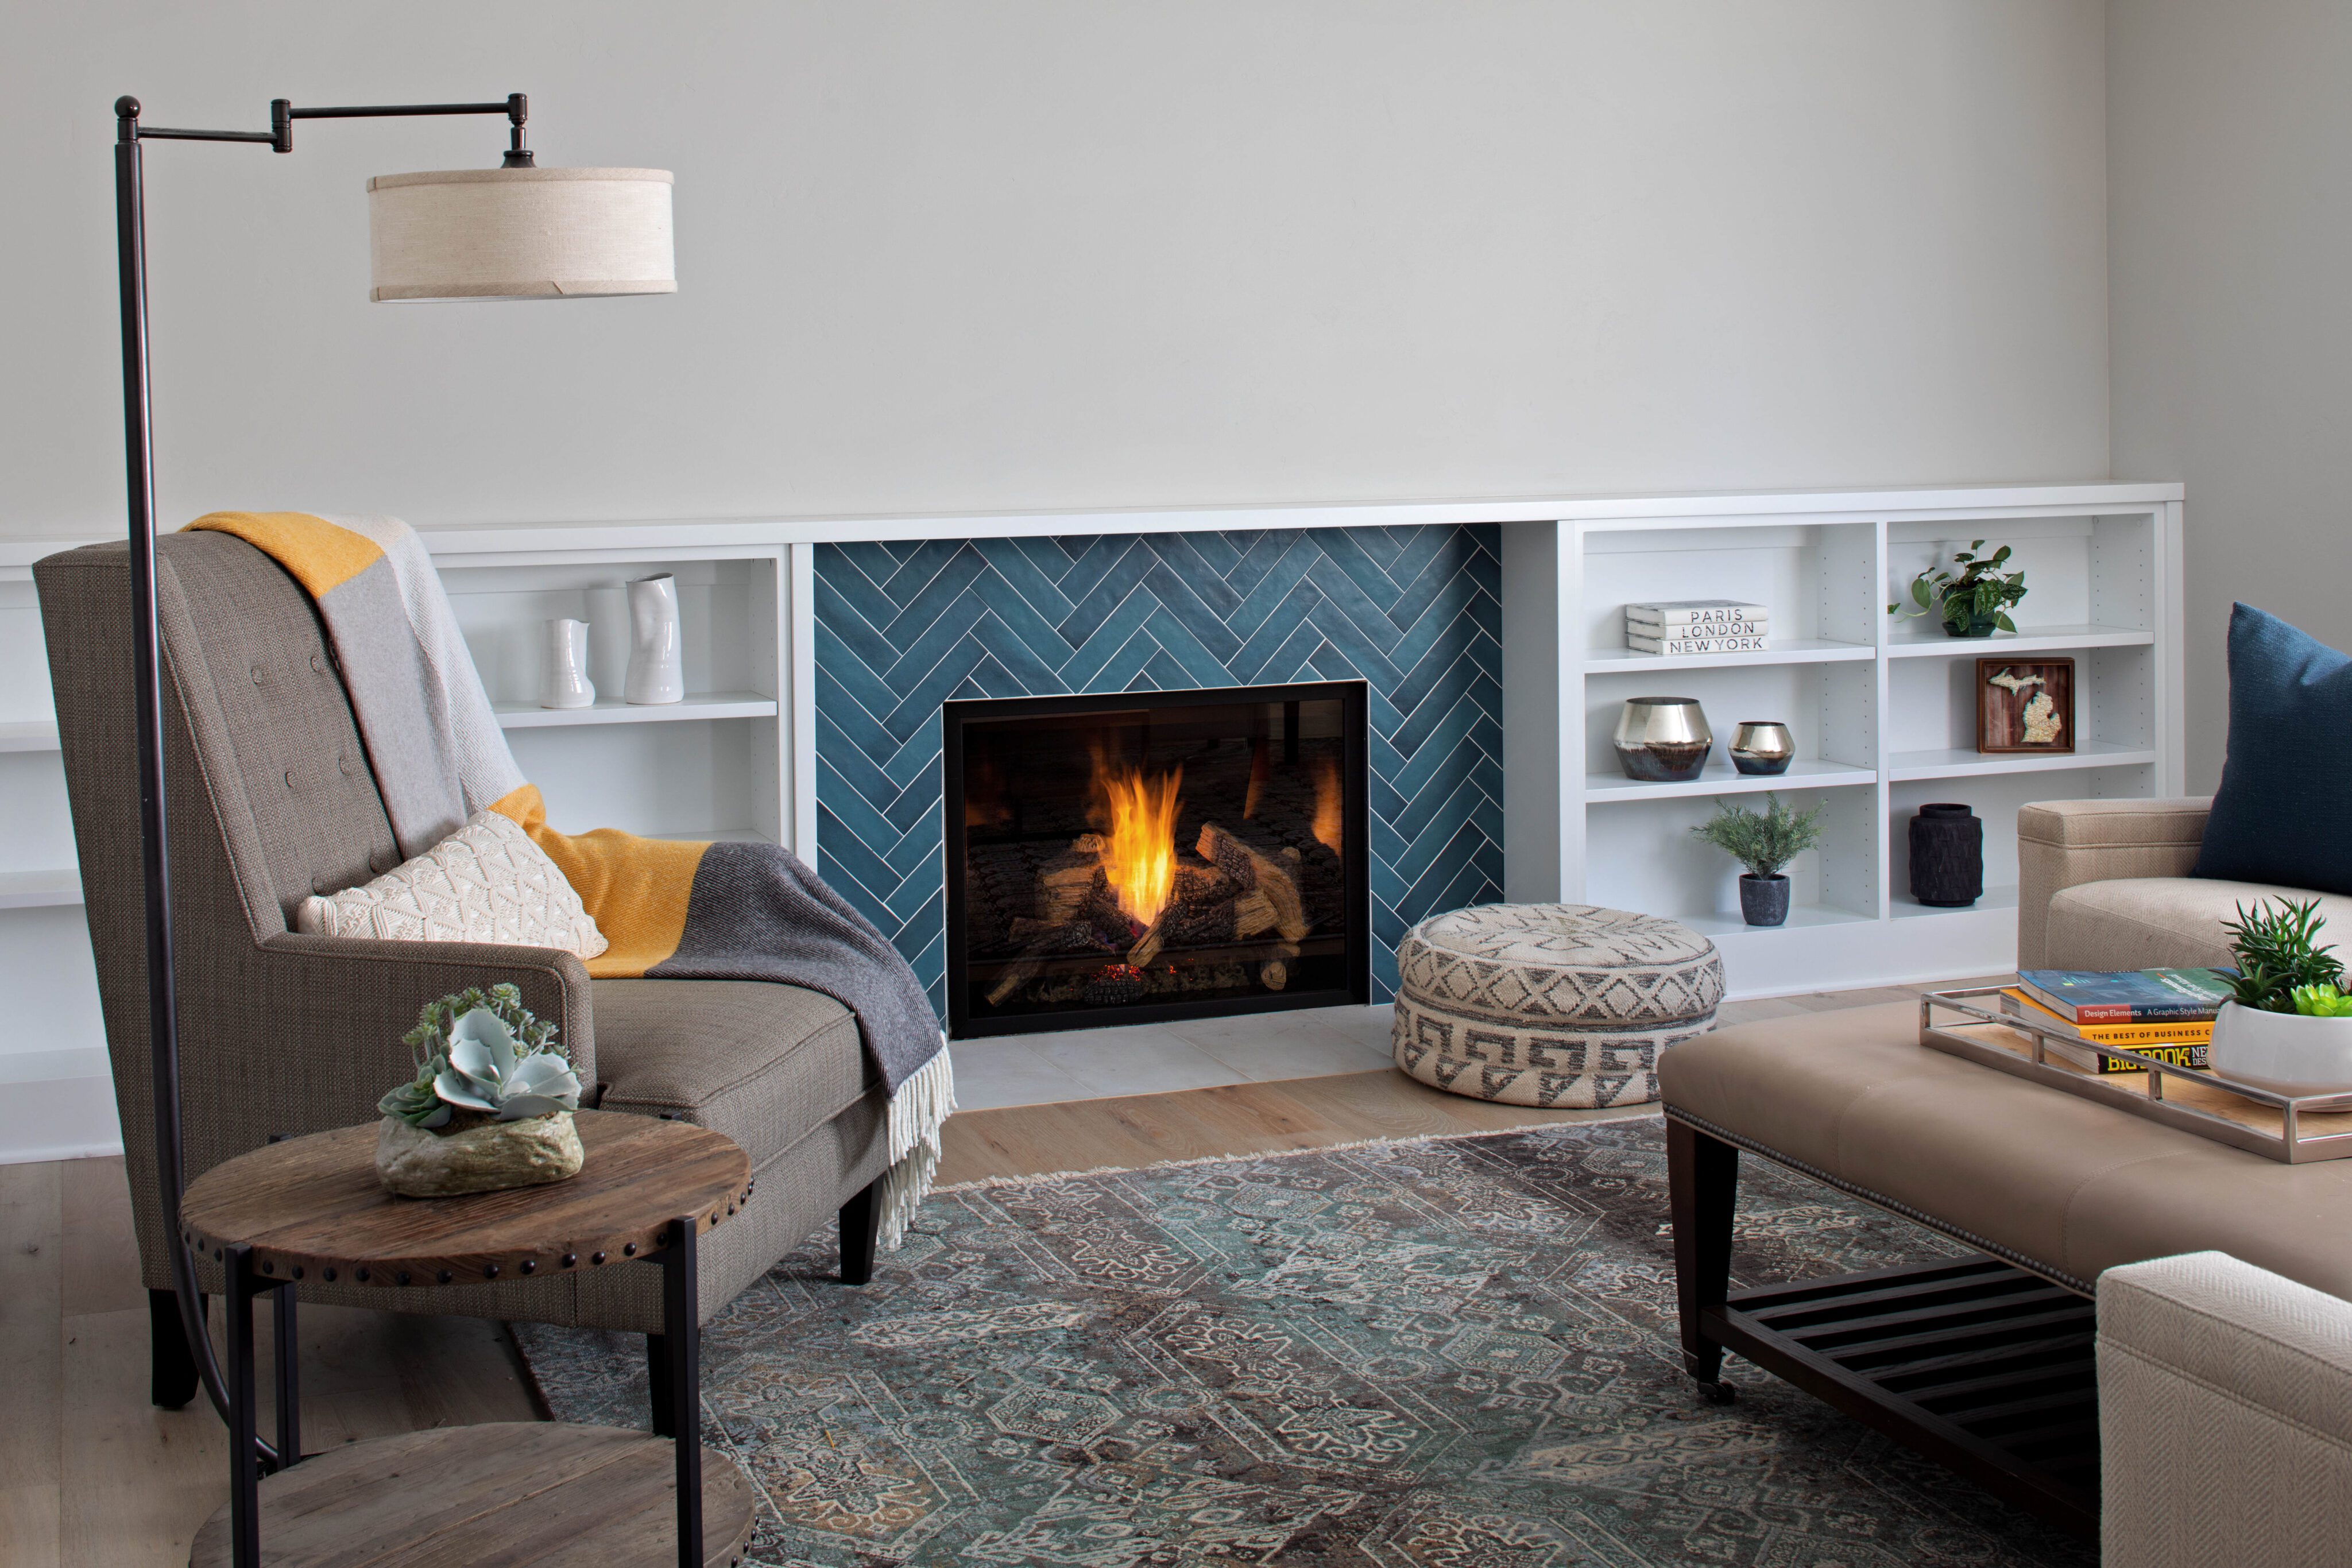 A-gas-fireplace-in-a-recent-all-electric-home-upgrade-by-Next-Stage-Design-scaled.jpg